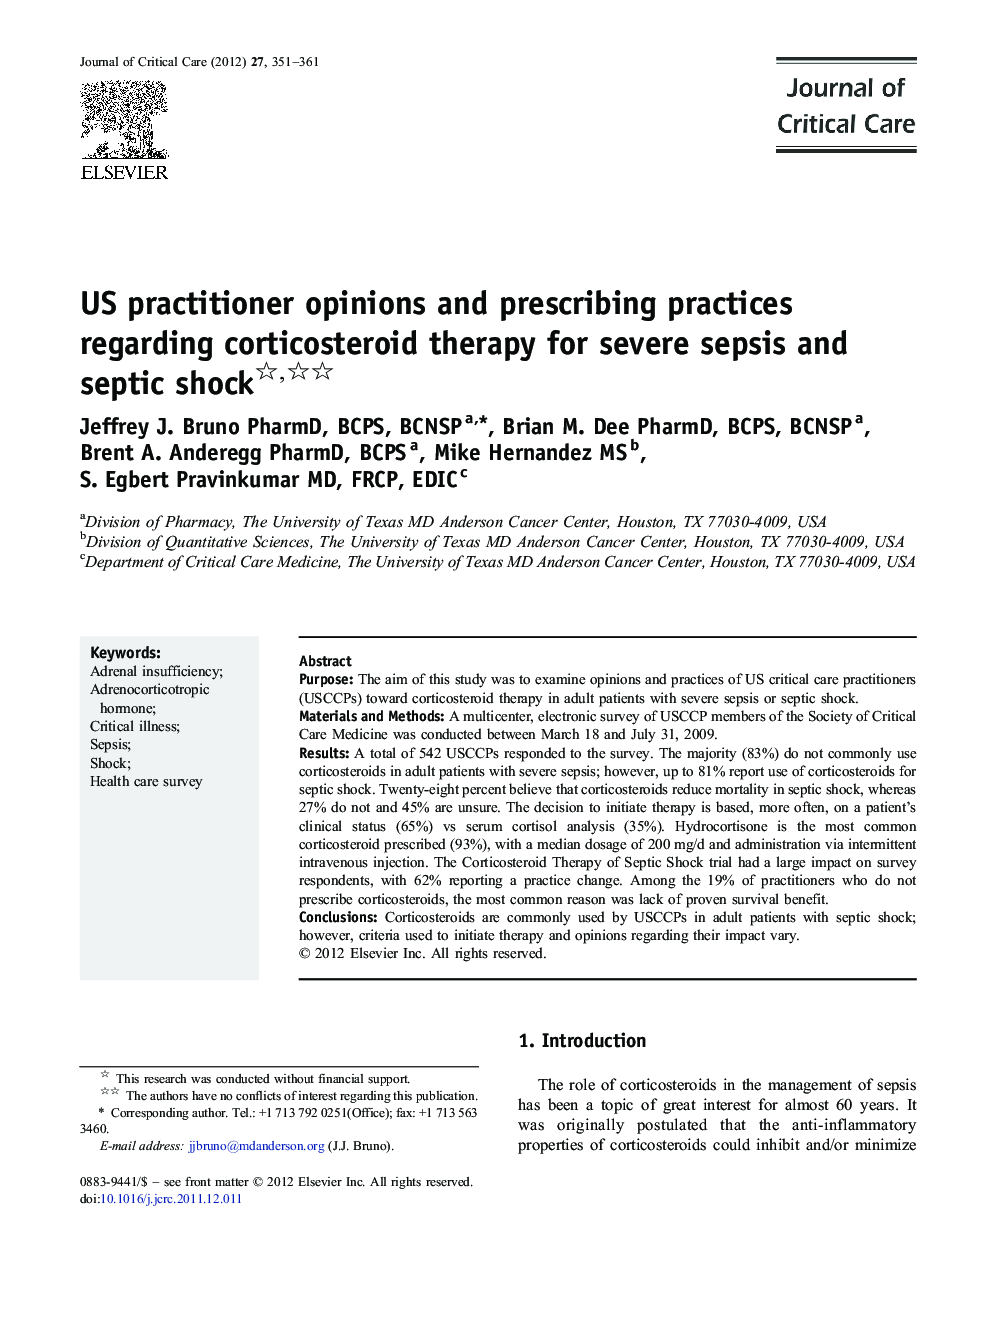 US practitioner opinions and prescribing practices regarding corticosteroid therapy for severe sepsis and septic shock